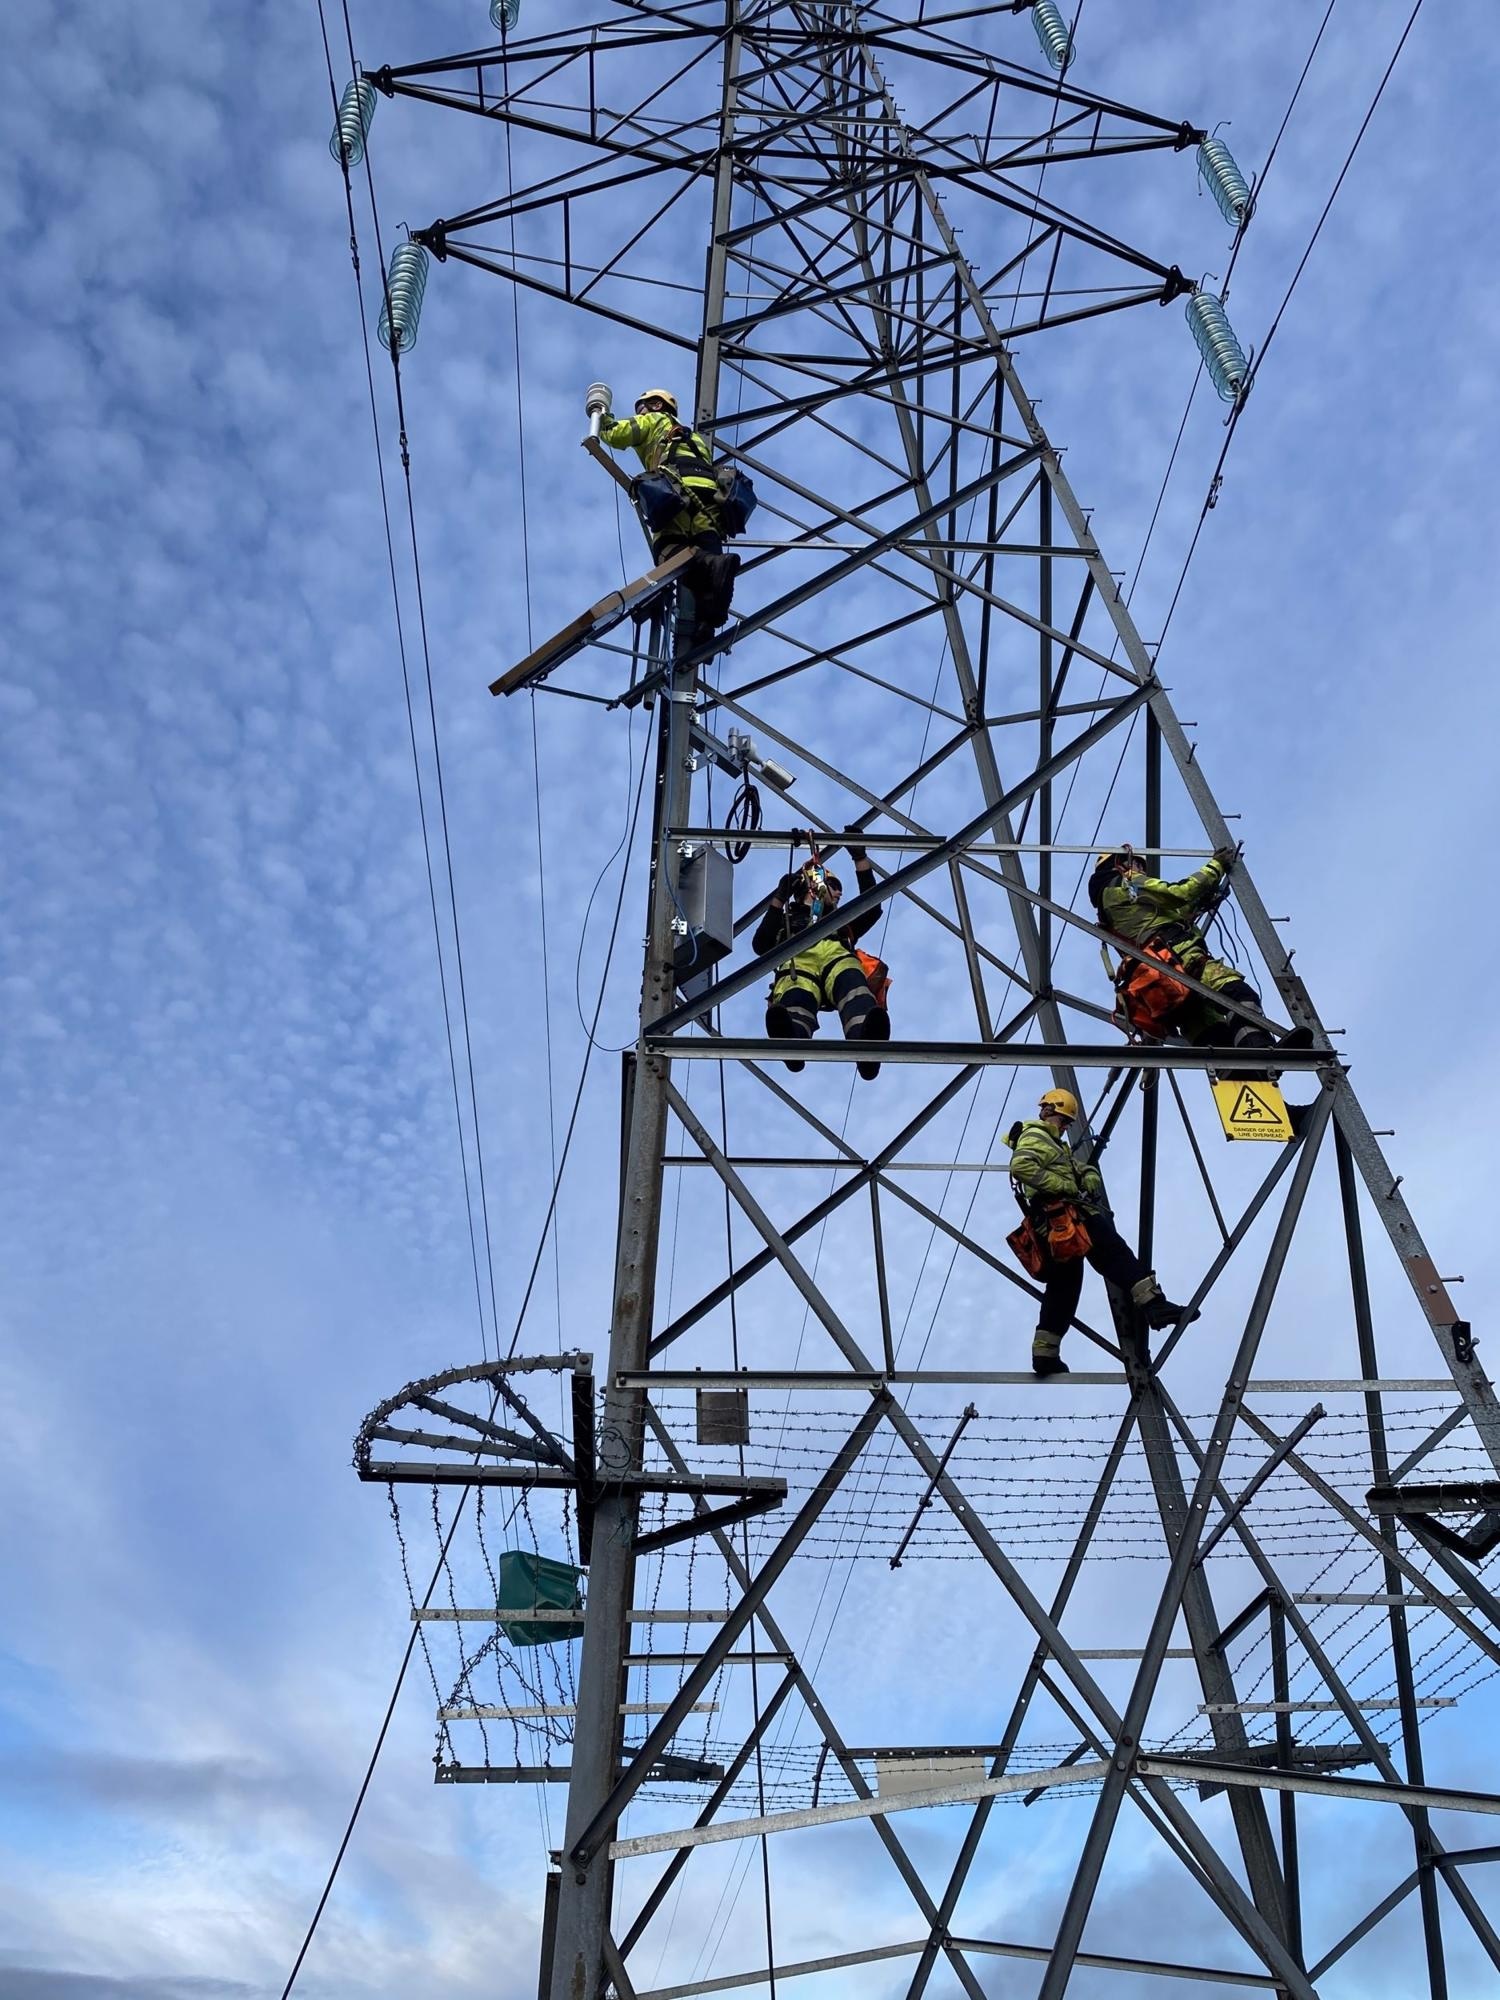 Monitoring and Anticipating the Formation of Ice on Power Lines